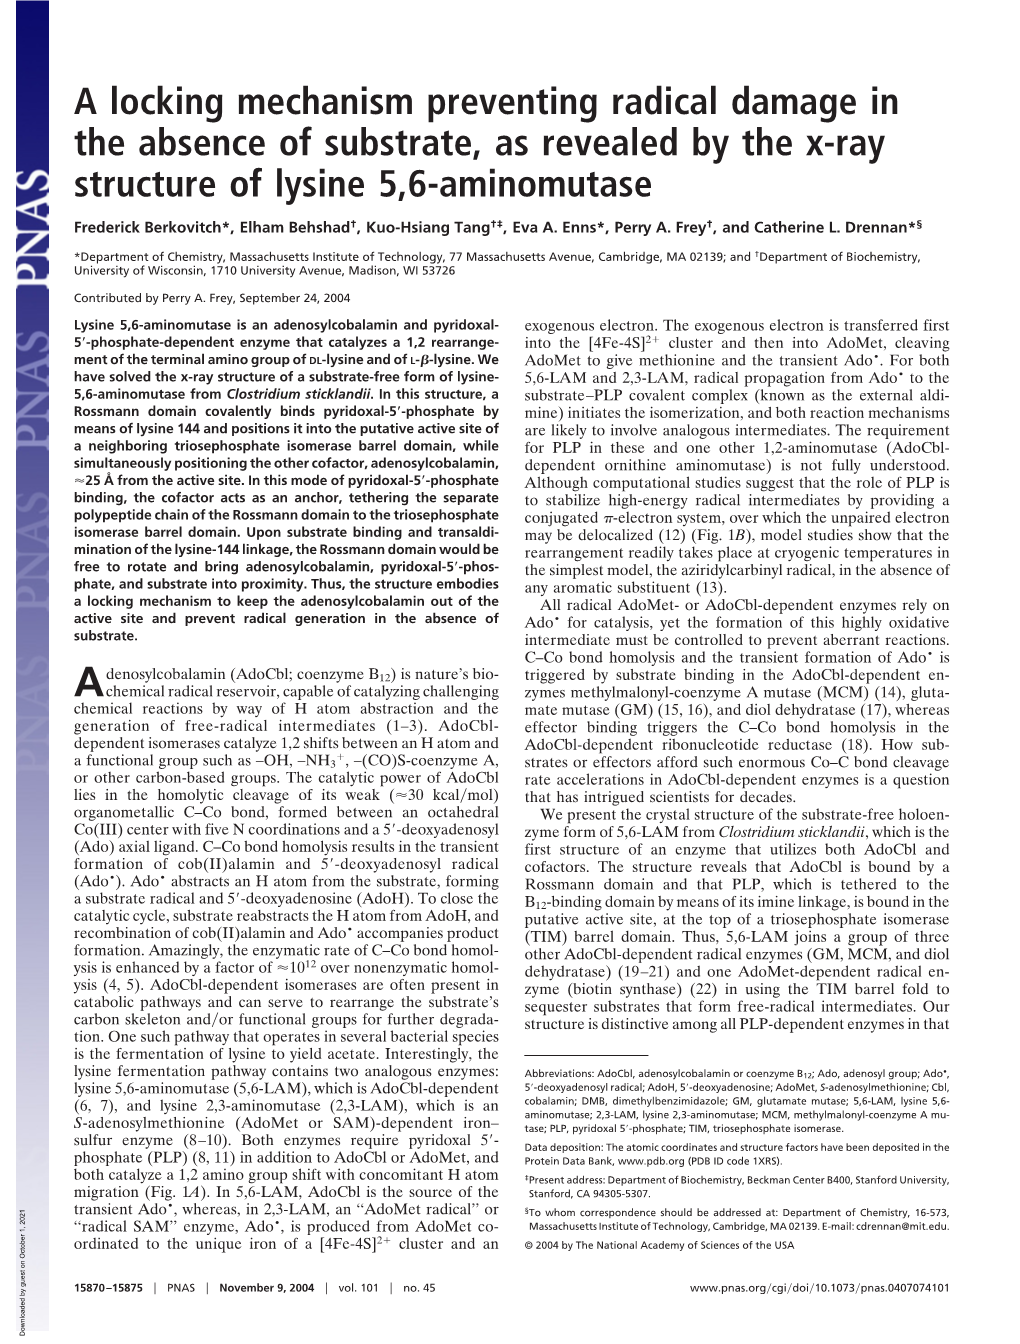 A Locking Mechanism Preventing Radical Damage in the Absence of Substrate, As Revealed by the X-Ray Structure of Lysine 5,6-Aminomutase